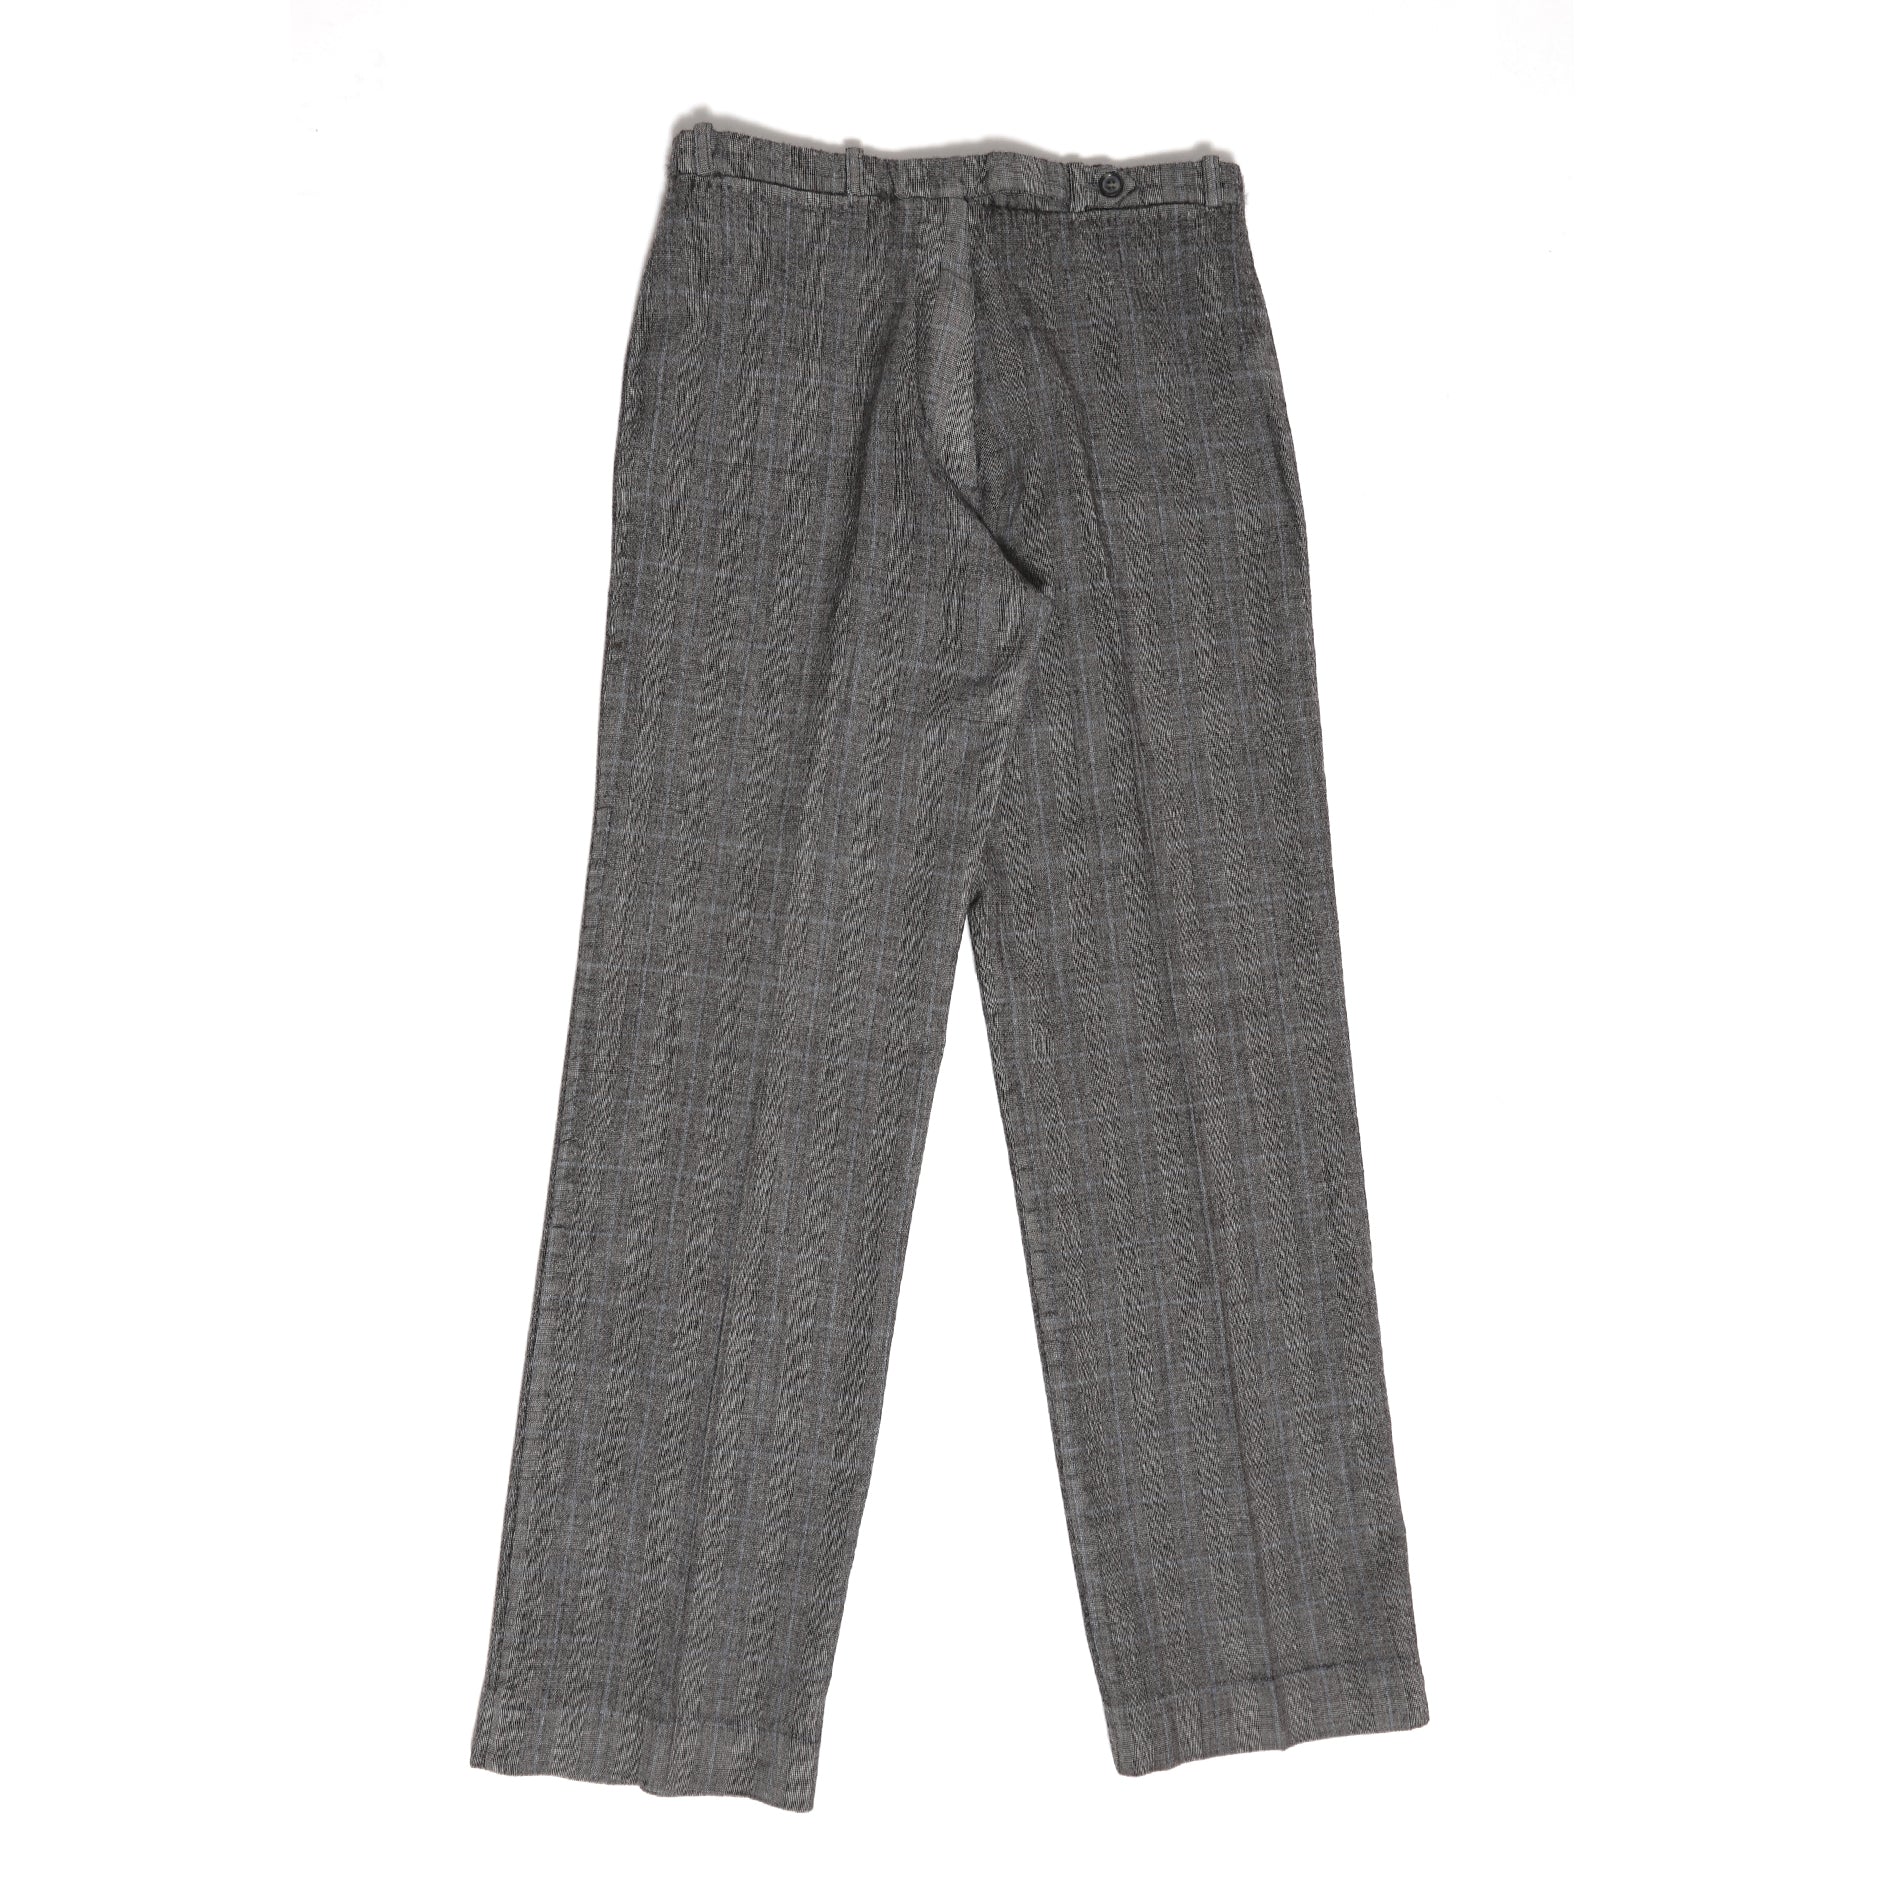 Maison Martin Margiela SS01 Reversed Checked Double Front Pants